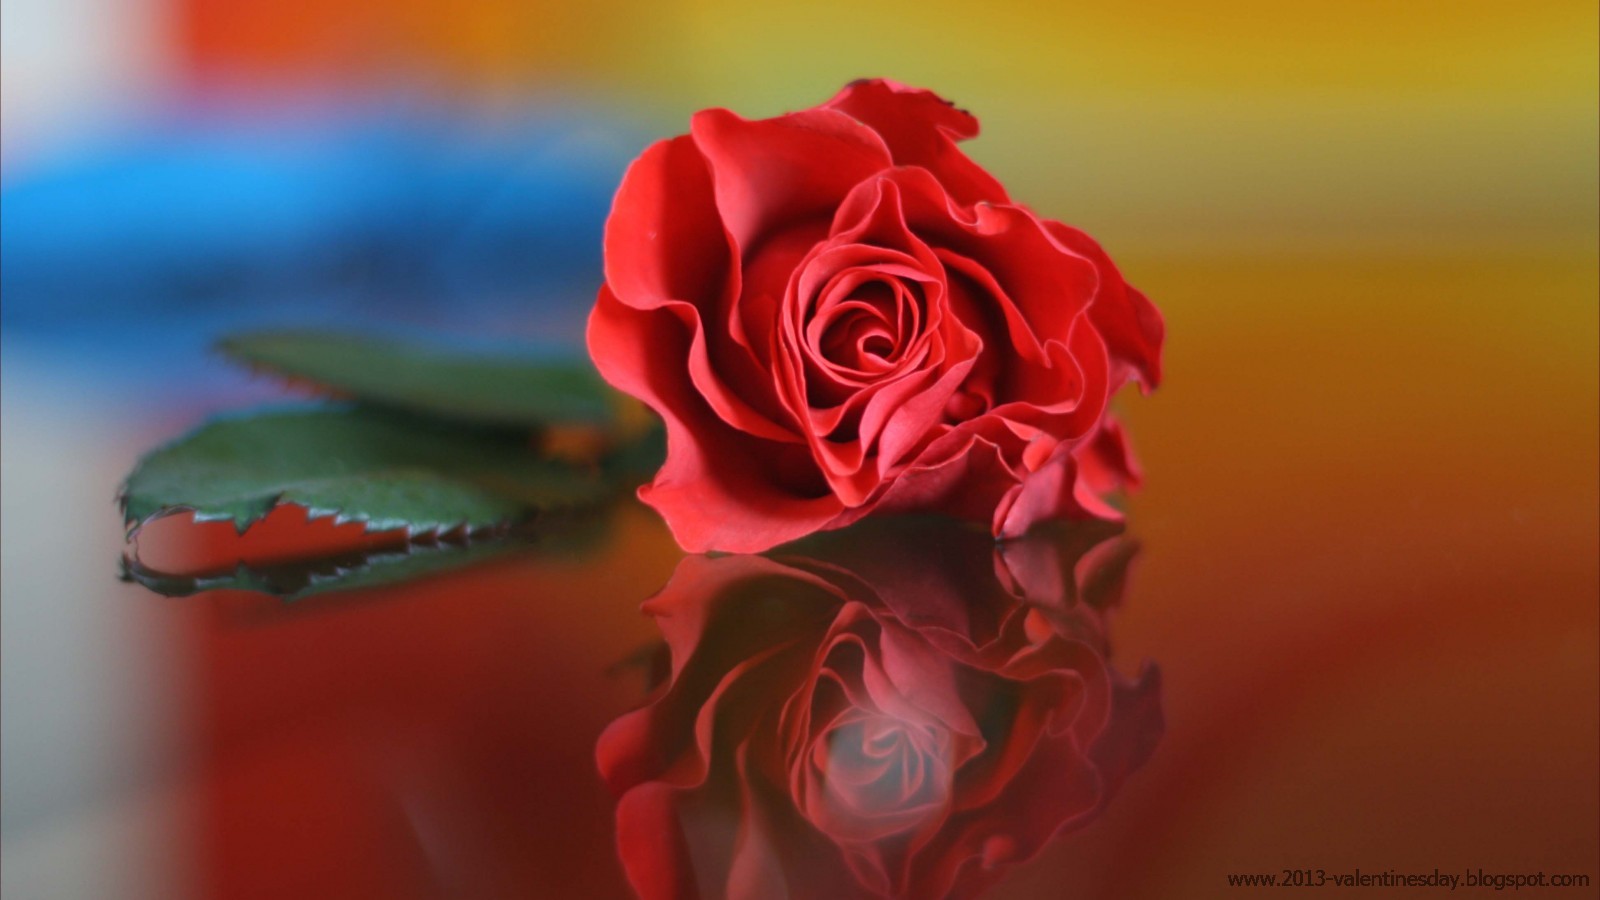 4. New Latest Happy Rose Day 2014 Hd Wallpapers